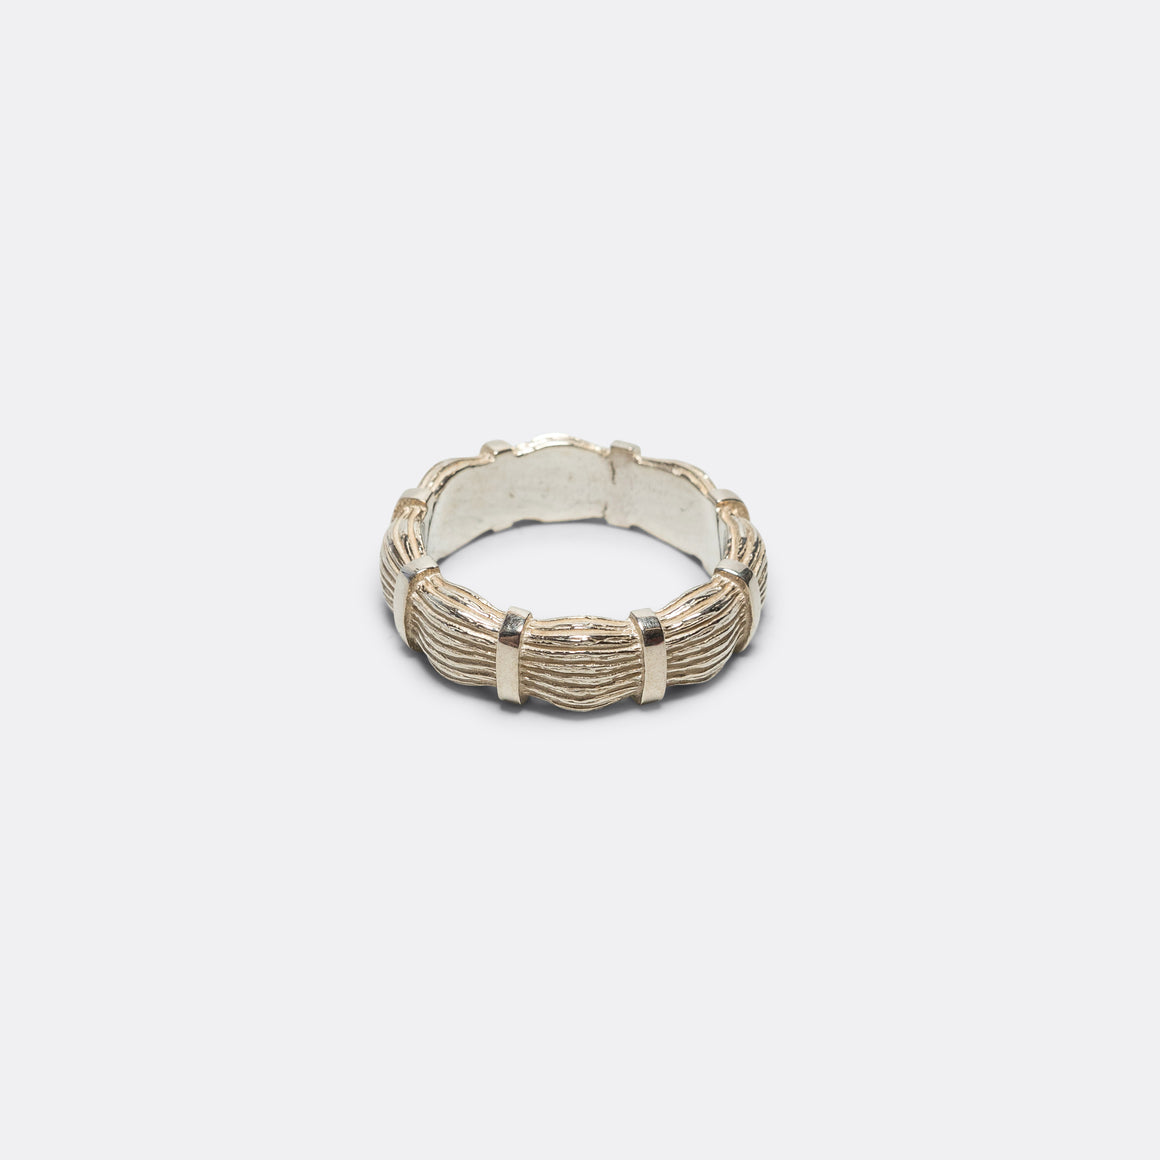 Bound Willow Band Ring - 925 Silver